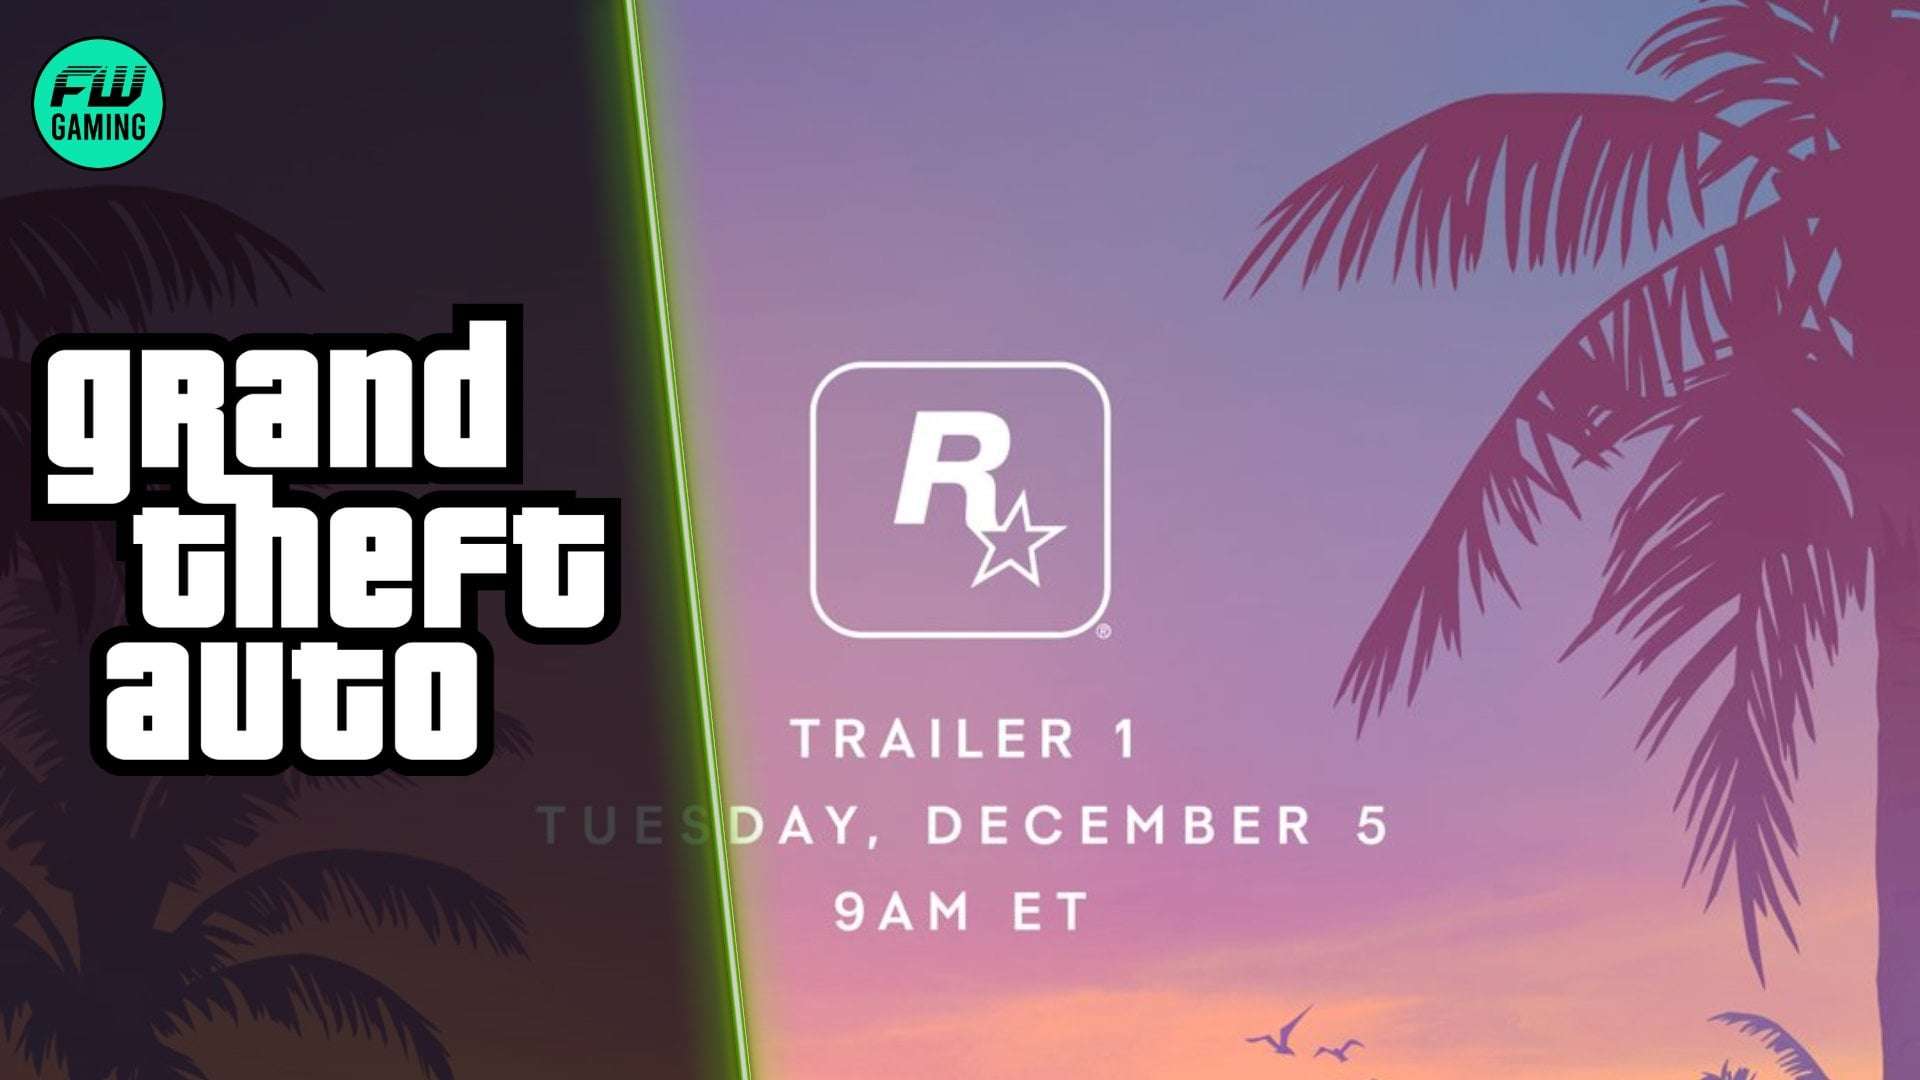 image for Rockstar Games’ GTA 6 Trailer Tweet Becomes the Most Liked Gaming Tweet EVER